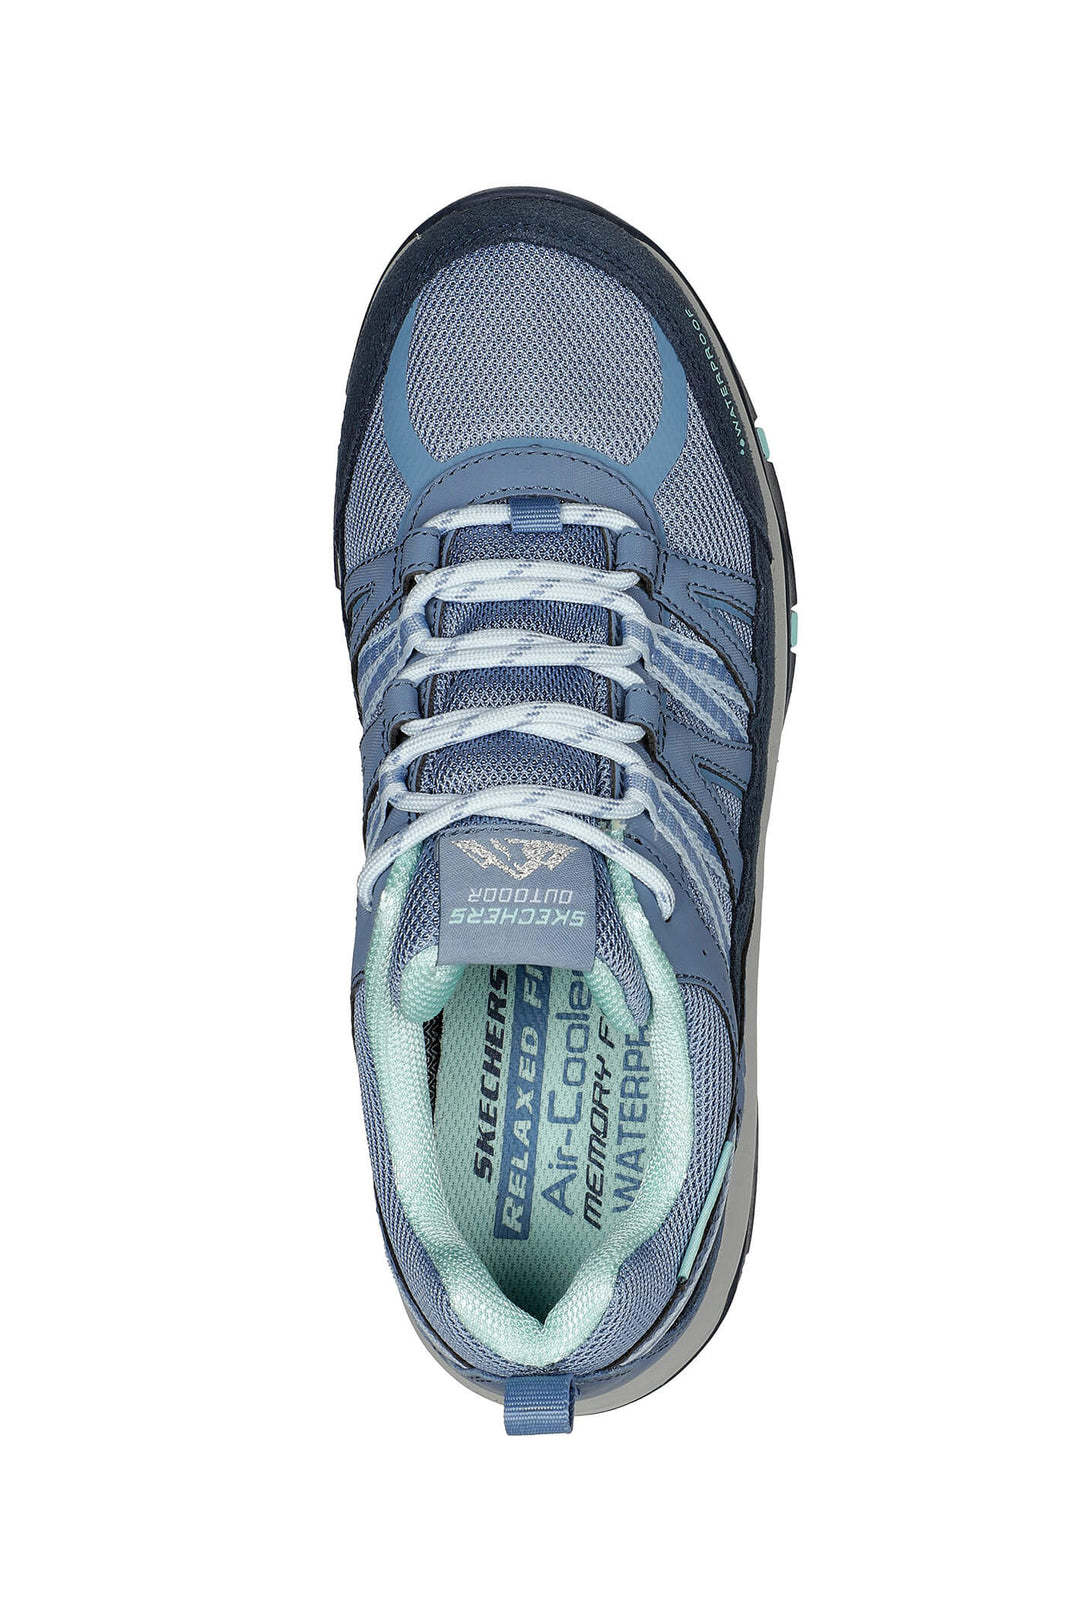 Skechers 180003 Trego Slate Lookout Point Trainers - Shirley Allum Boutique